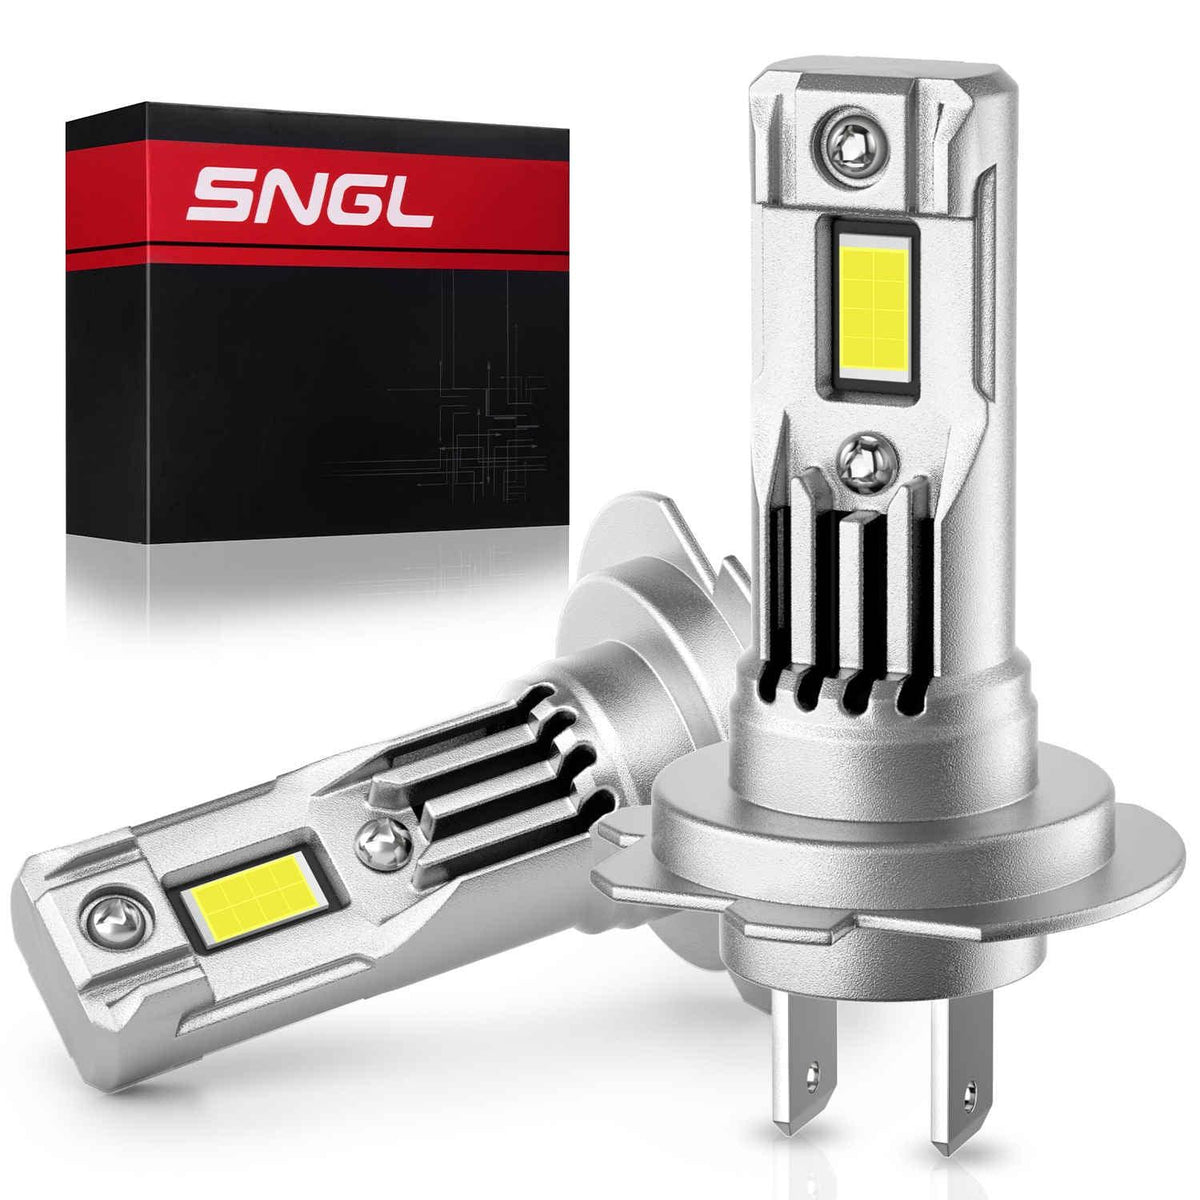 Sngl H7 LED Headlight Bulb 6000K White, 1:1 Size No Adapter Required